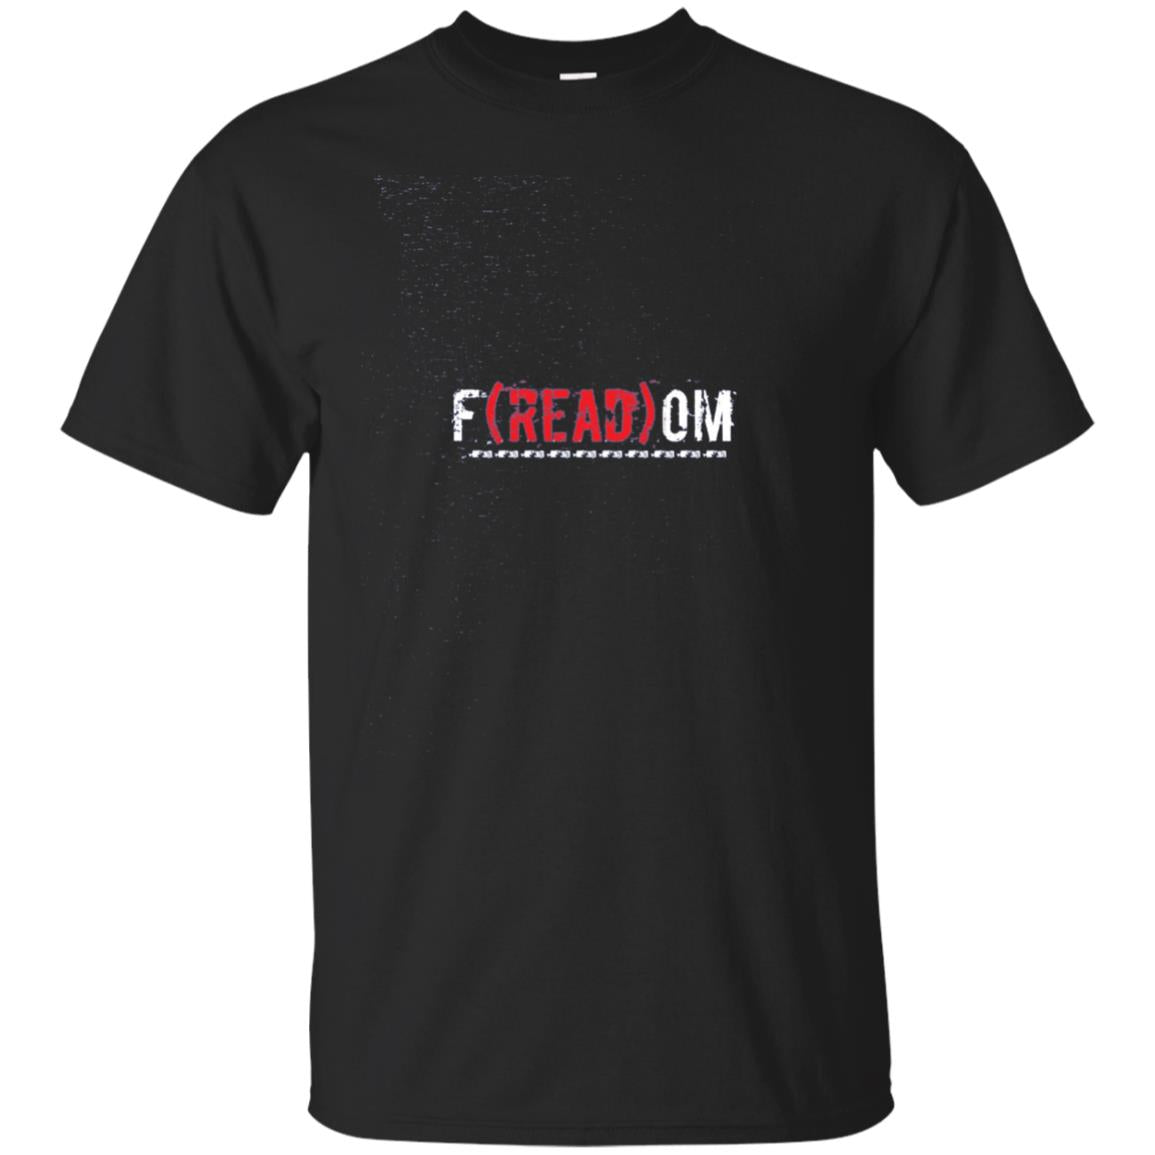 F(read)om Freedom Reading T-shirt | Books Shirts Gifts